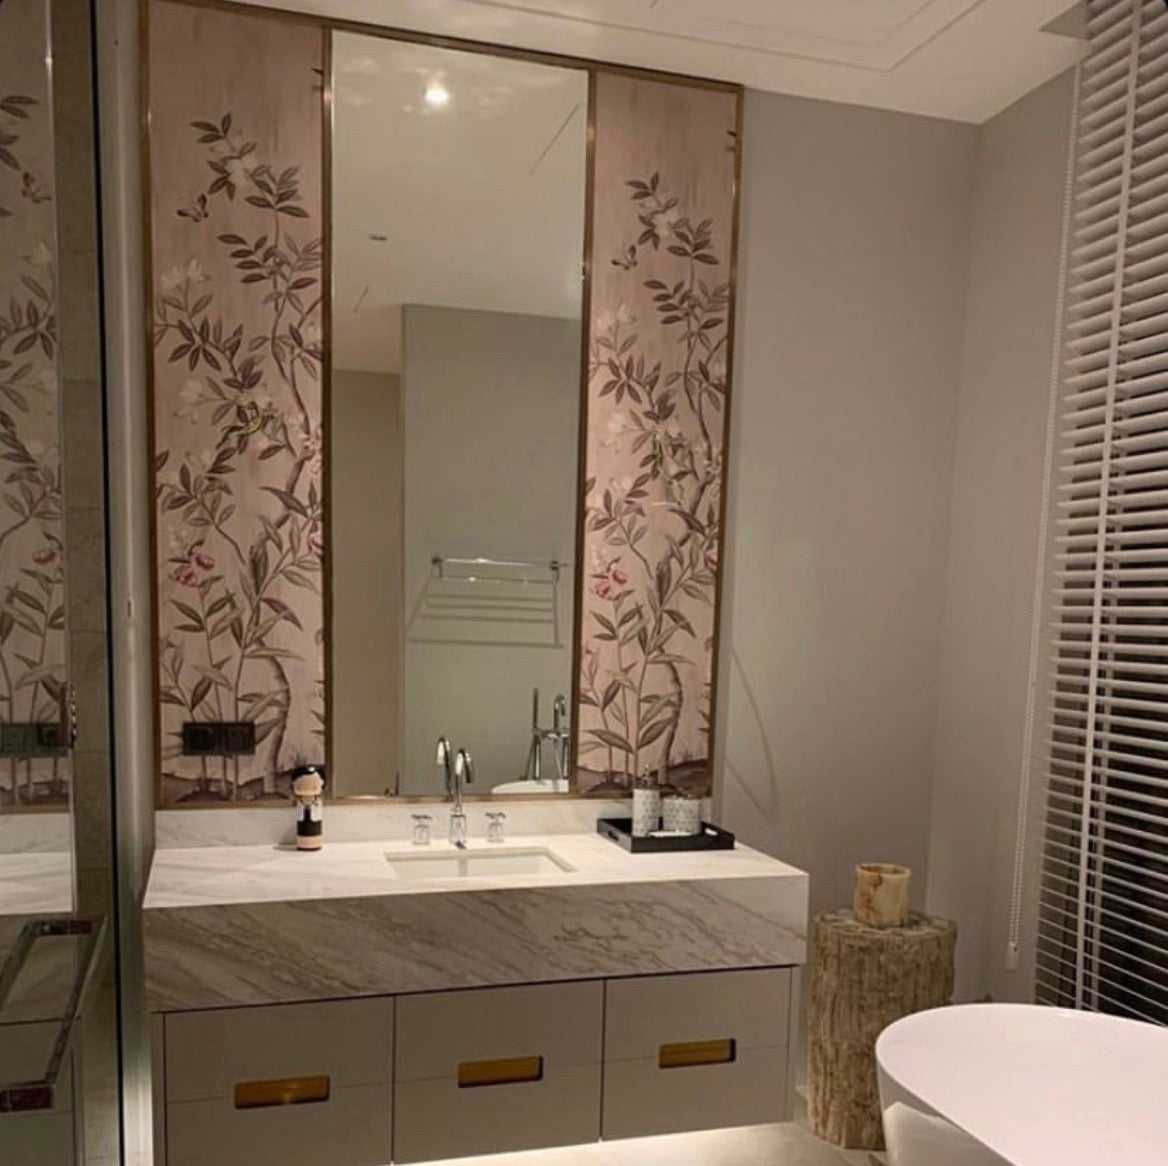 Bathroom featuring Diane Hill's 'Chinoiserie Chic' wallpaper for Rebel Walls as two wall art panels, one on each side of mirror above sink